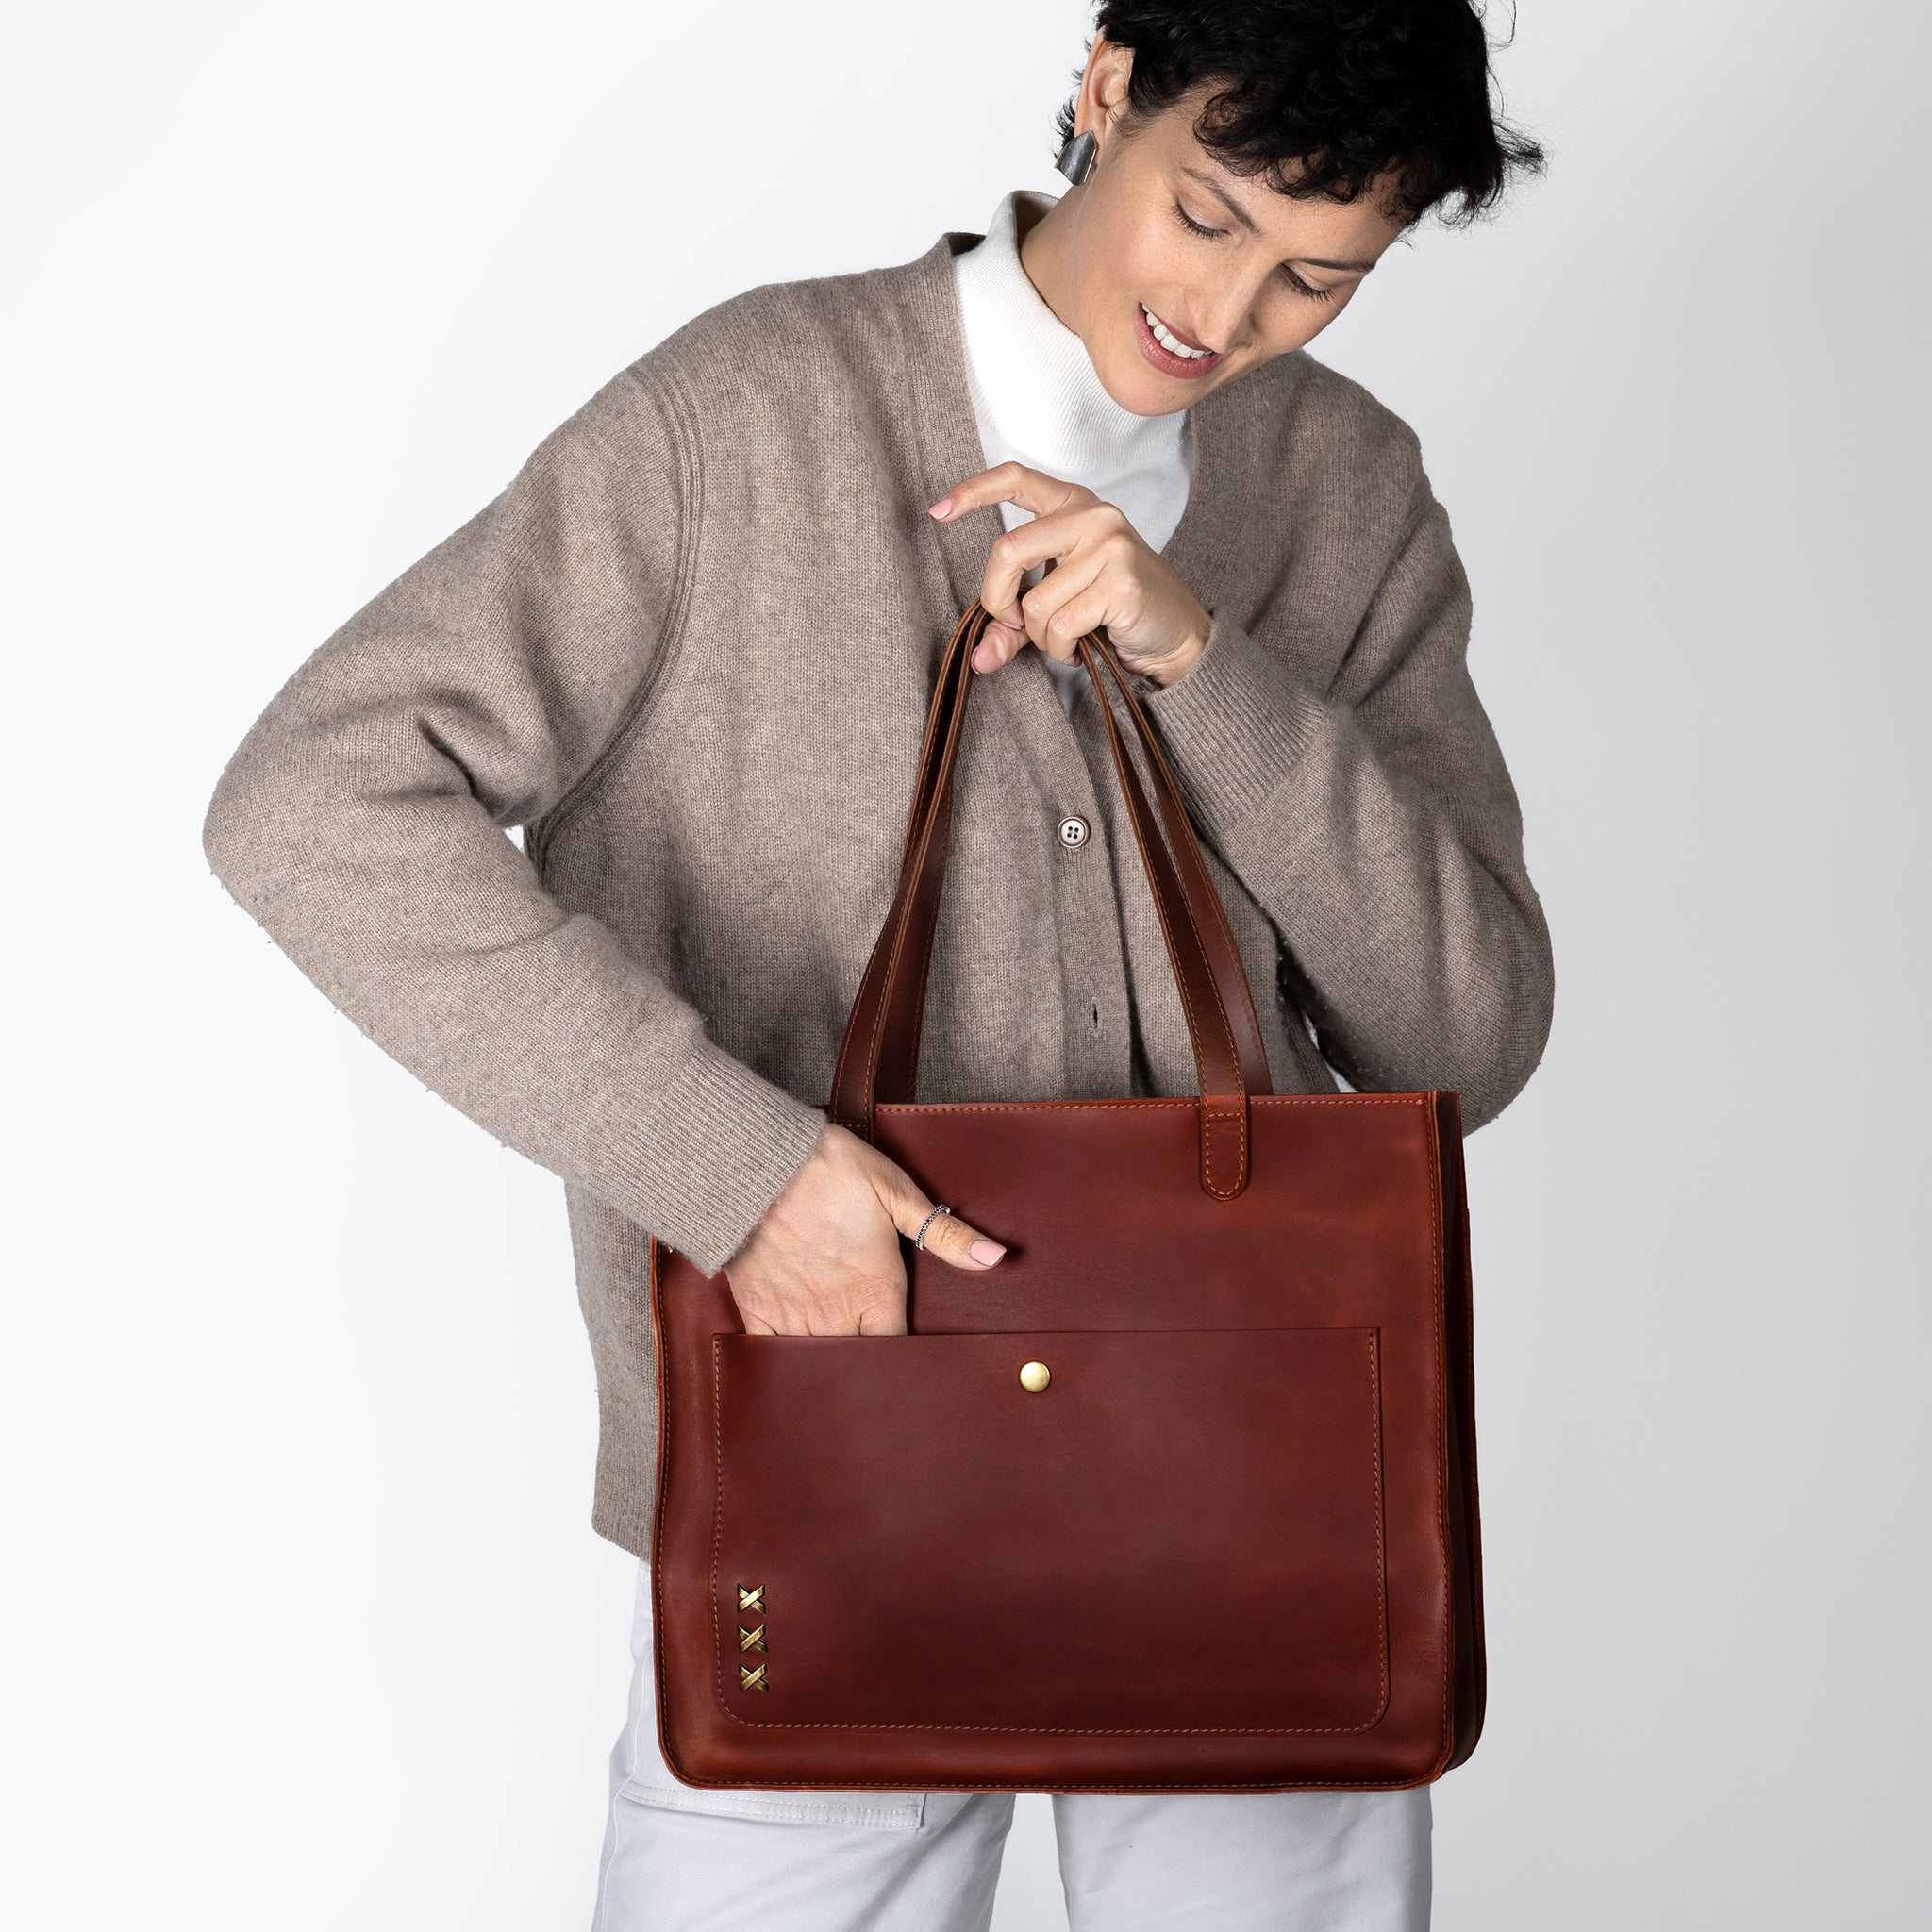 Leather Tote -  Western Shopper